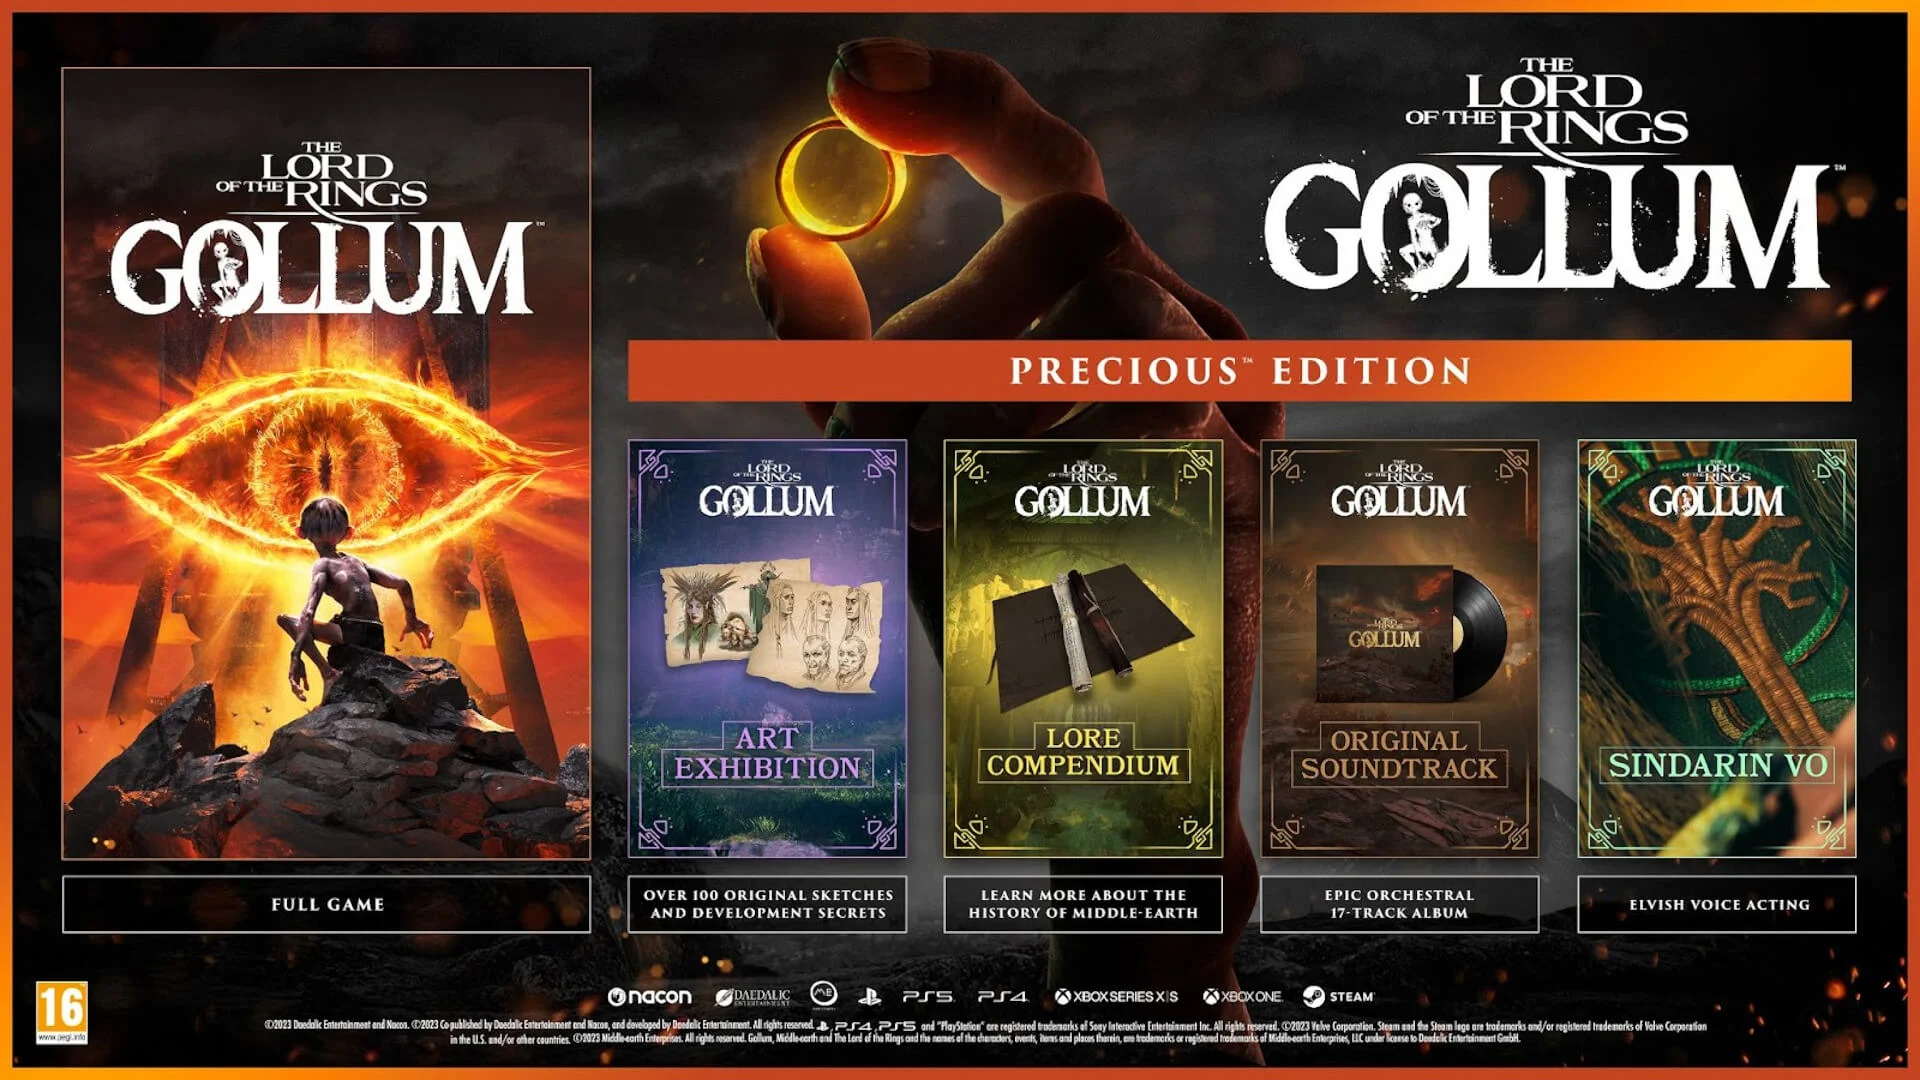 The Lord Of The Rings Gollum Precious Edition Interstitial.webp